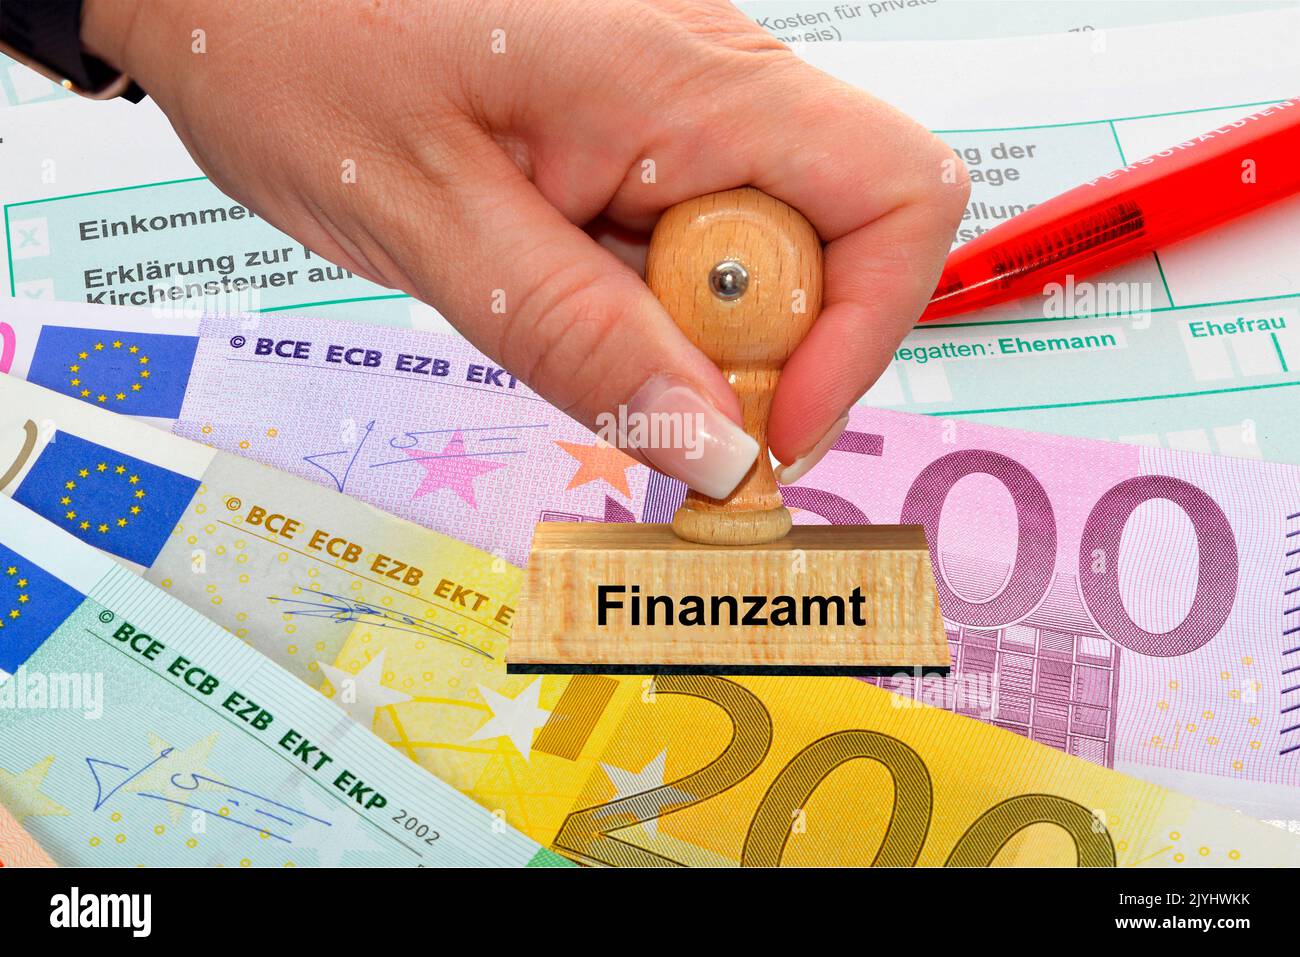 woman's hand with stamp lettering, Finanzamt, taxation office, Euro bills an pencil in the backgound, Germany Stock Photo